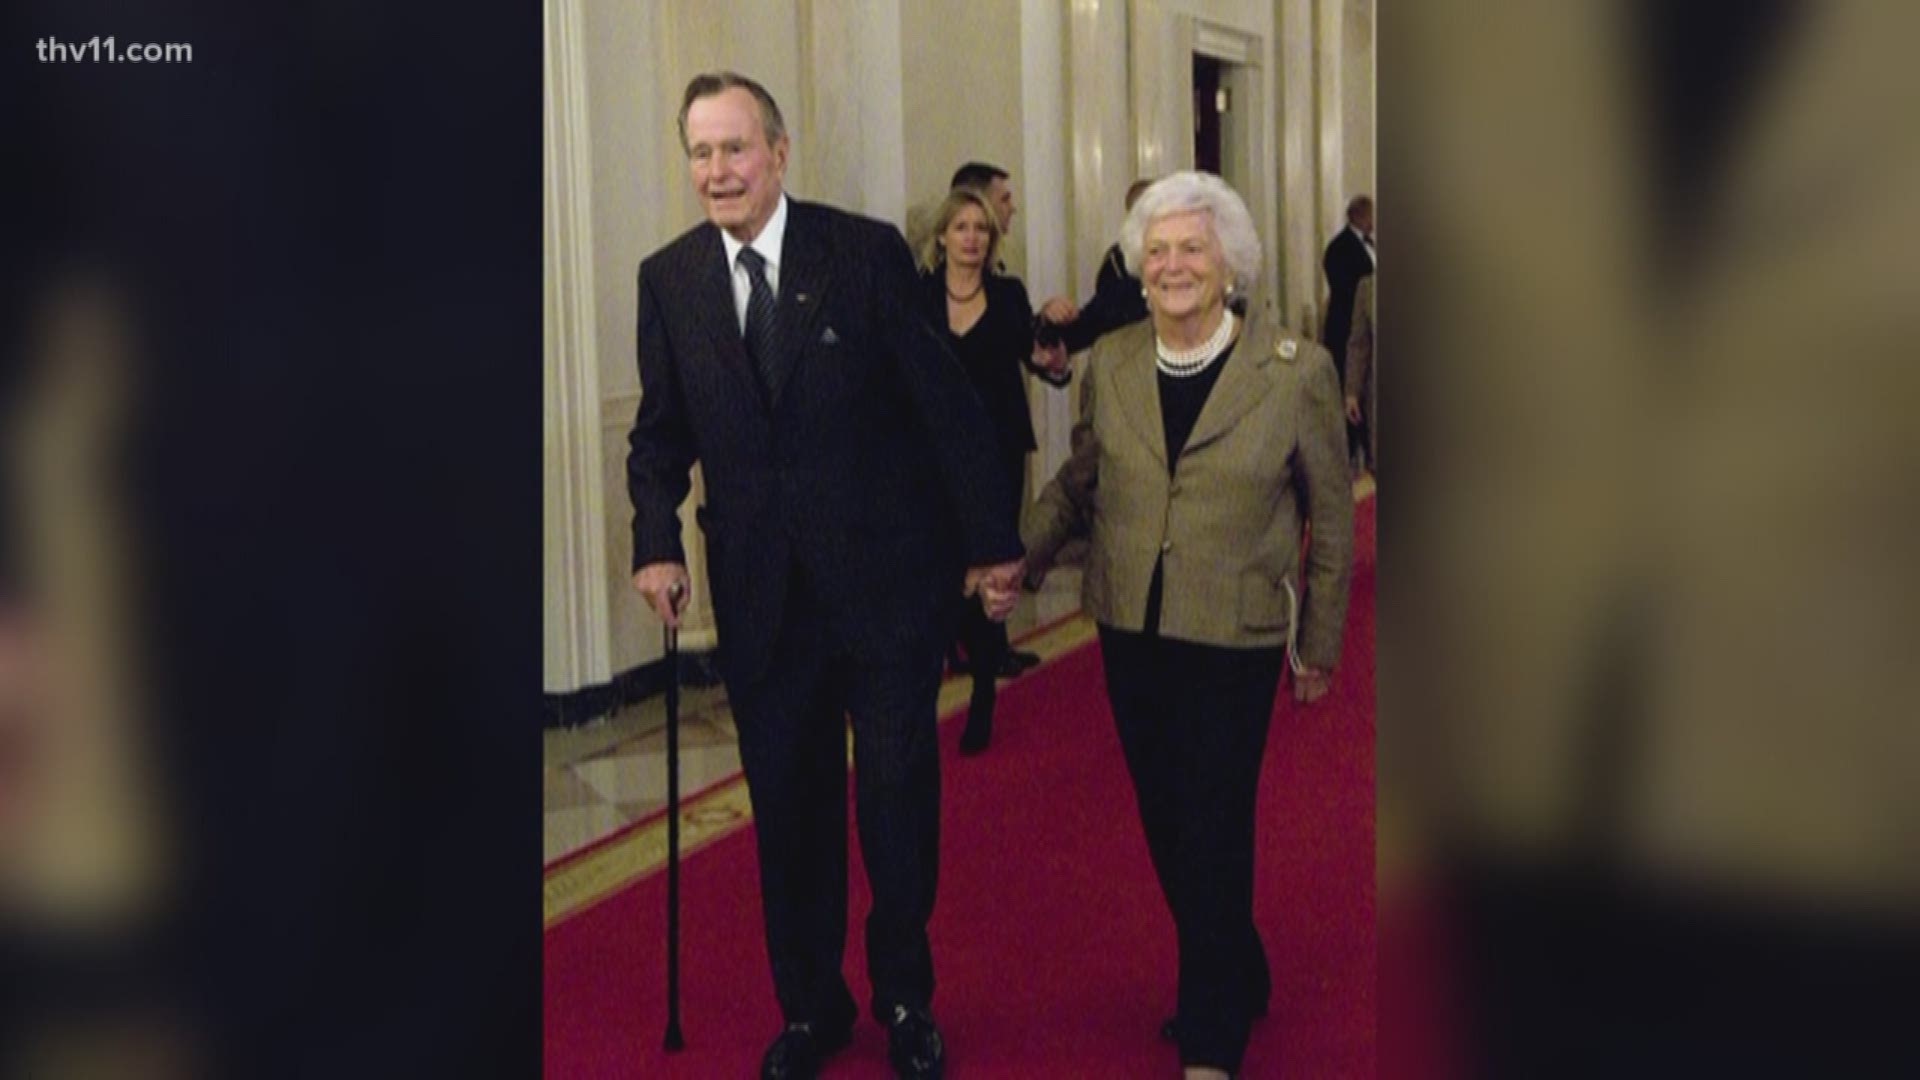 The partof this story that has stayed with me is that her husband, George H W Bush, held Her hand that entire last day of her life.